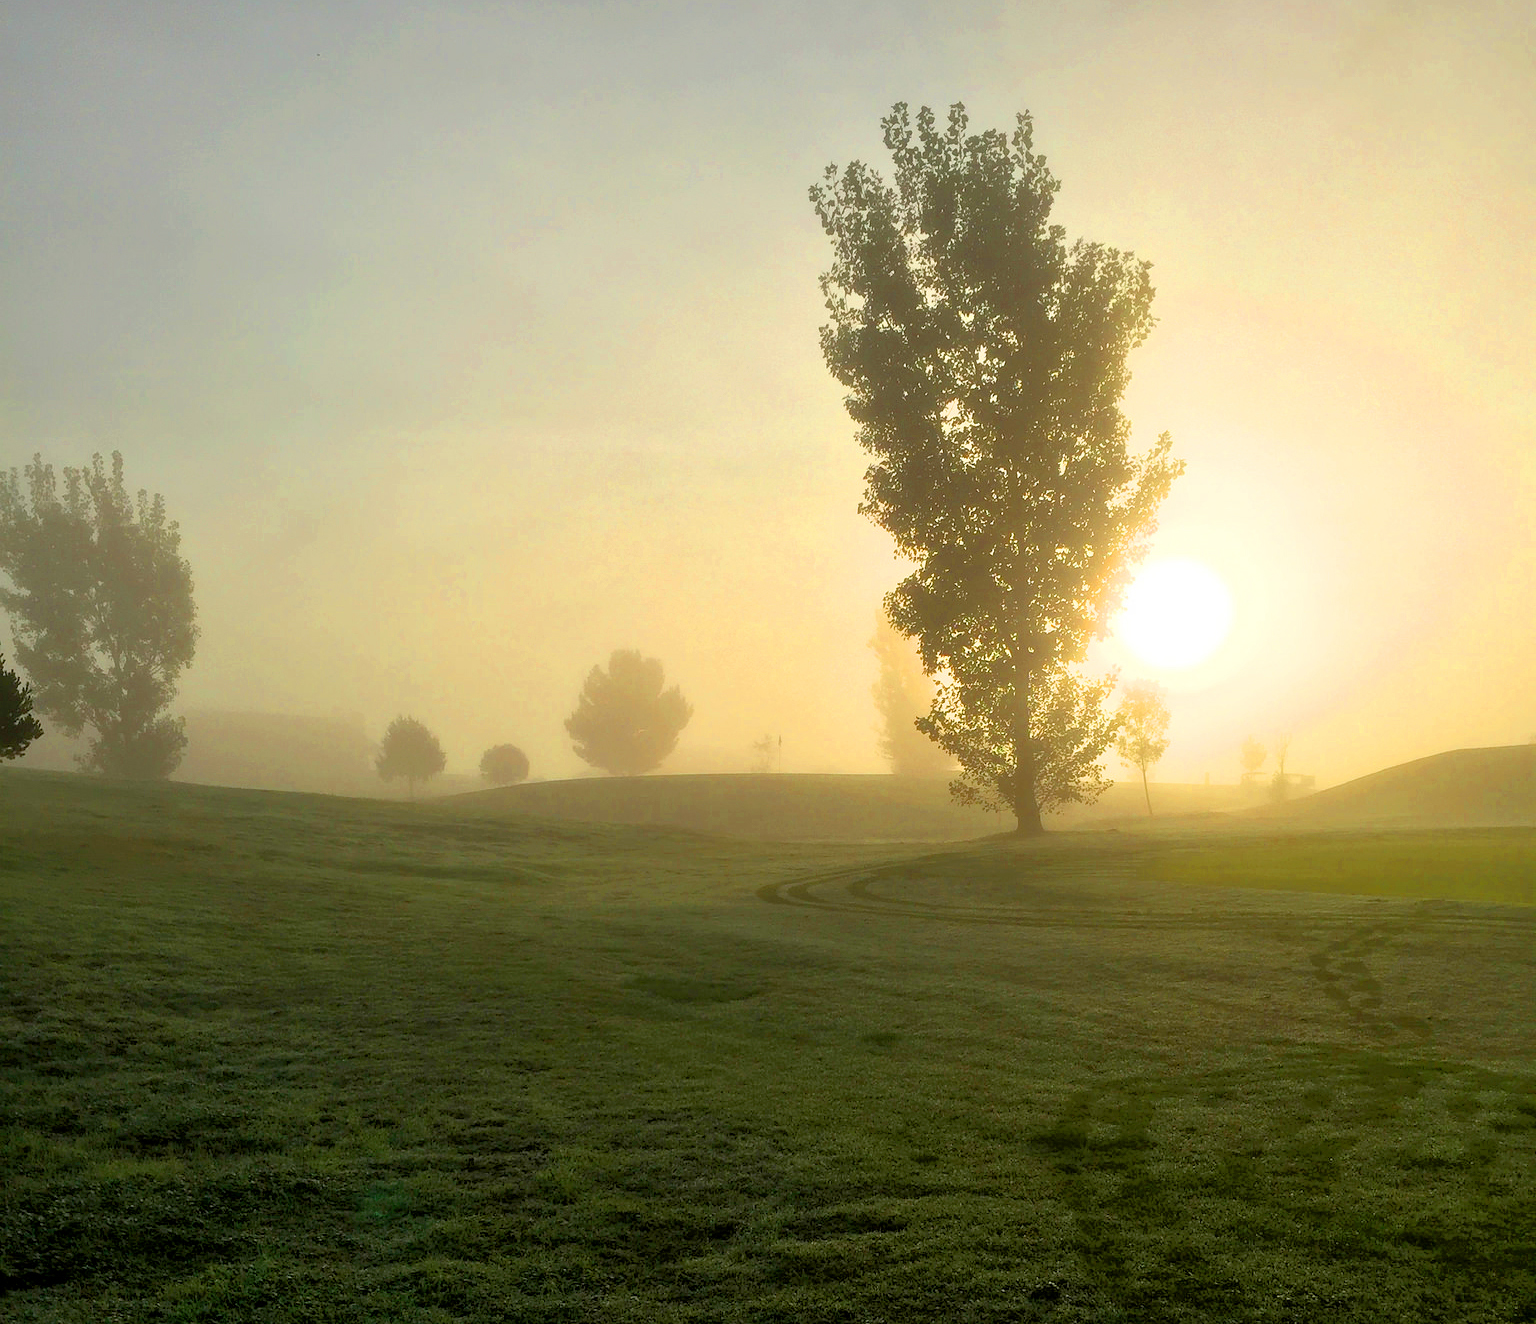 Early morning dew and mist greet the sunrise at the Lake Carlsbad Golf Course. Photo by Matt Castro.